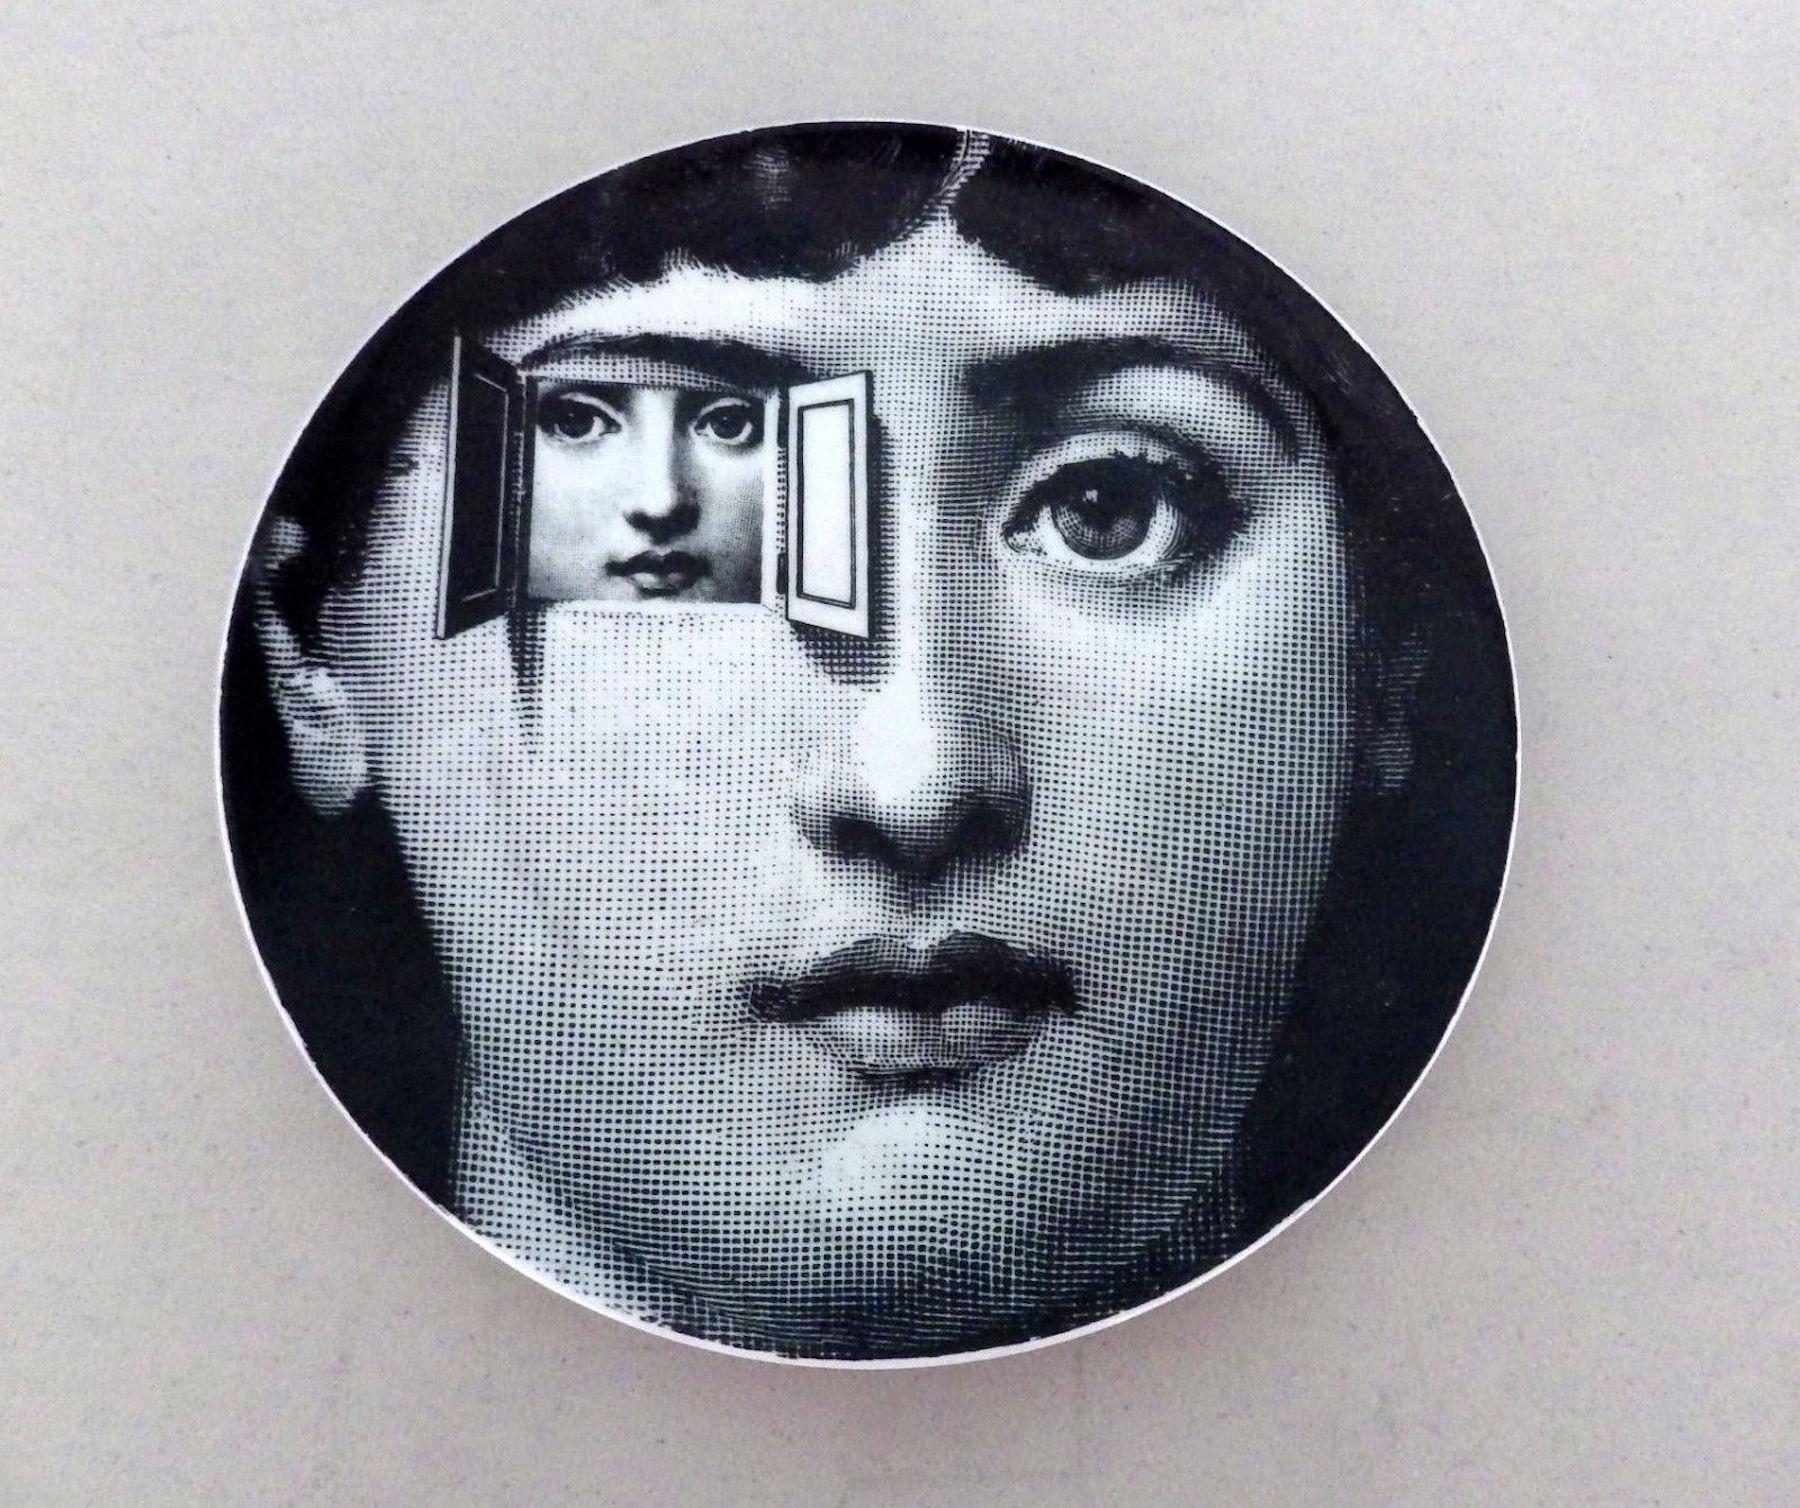 Vintage Tema E Variazioni porcelain plate, by Fornasetti of Milano Italy, An evocative porcelain plate by Piero Fornasetti (1913-1988) of Lina Cavalieri, the artist's muse
Tema E Variazioni porcelain plate, by Fornasetti of Milano Italy #116.
 